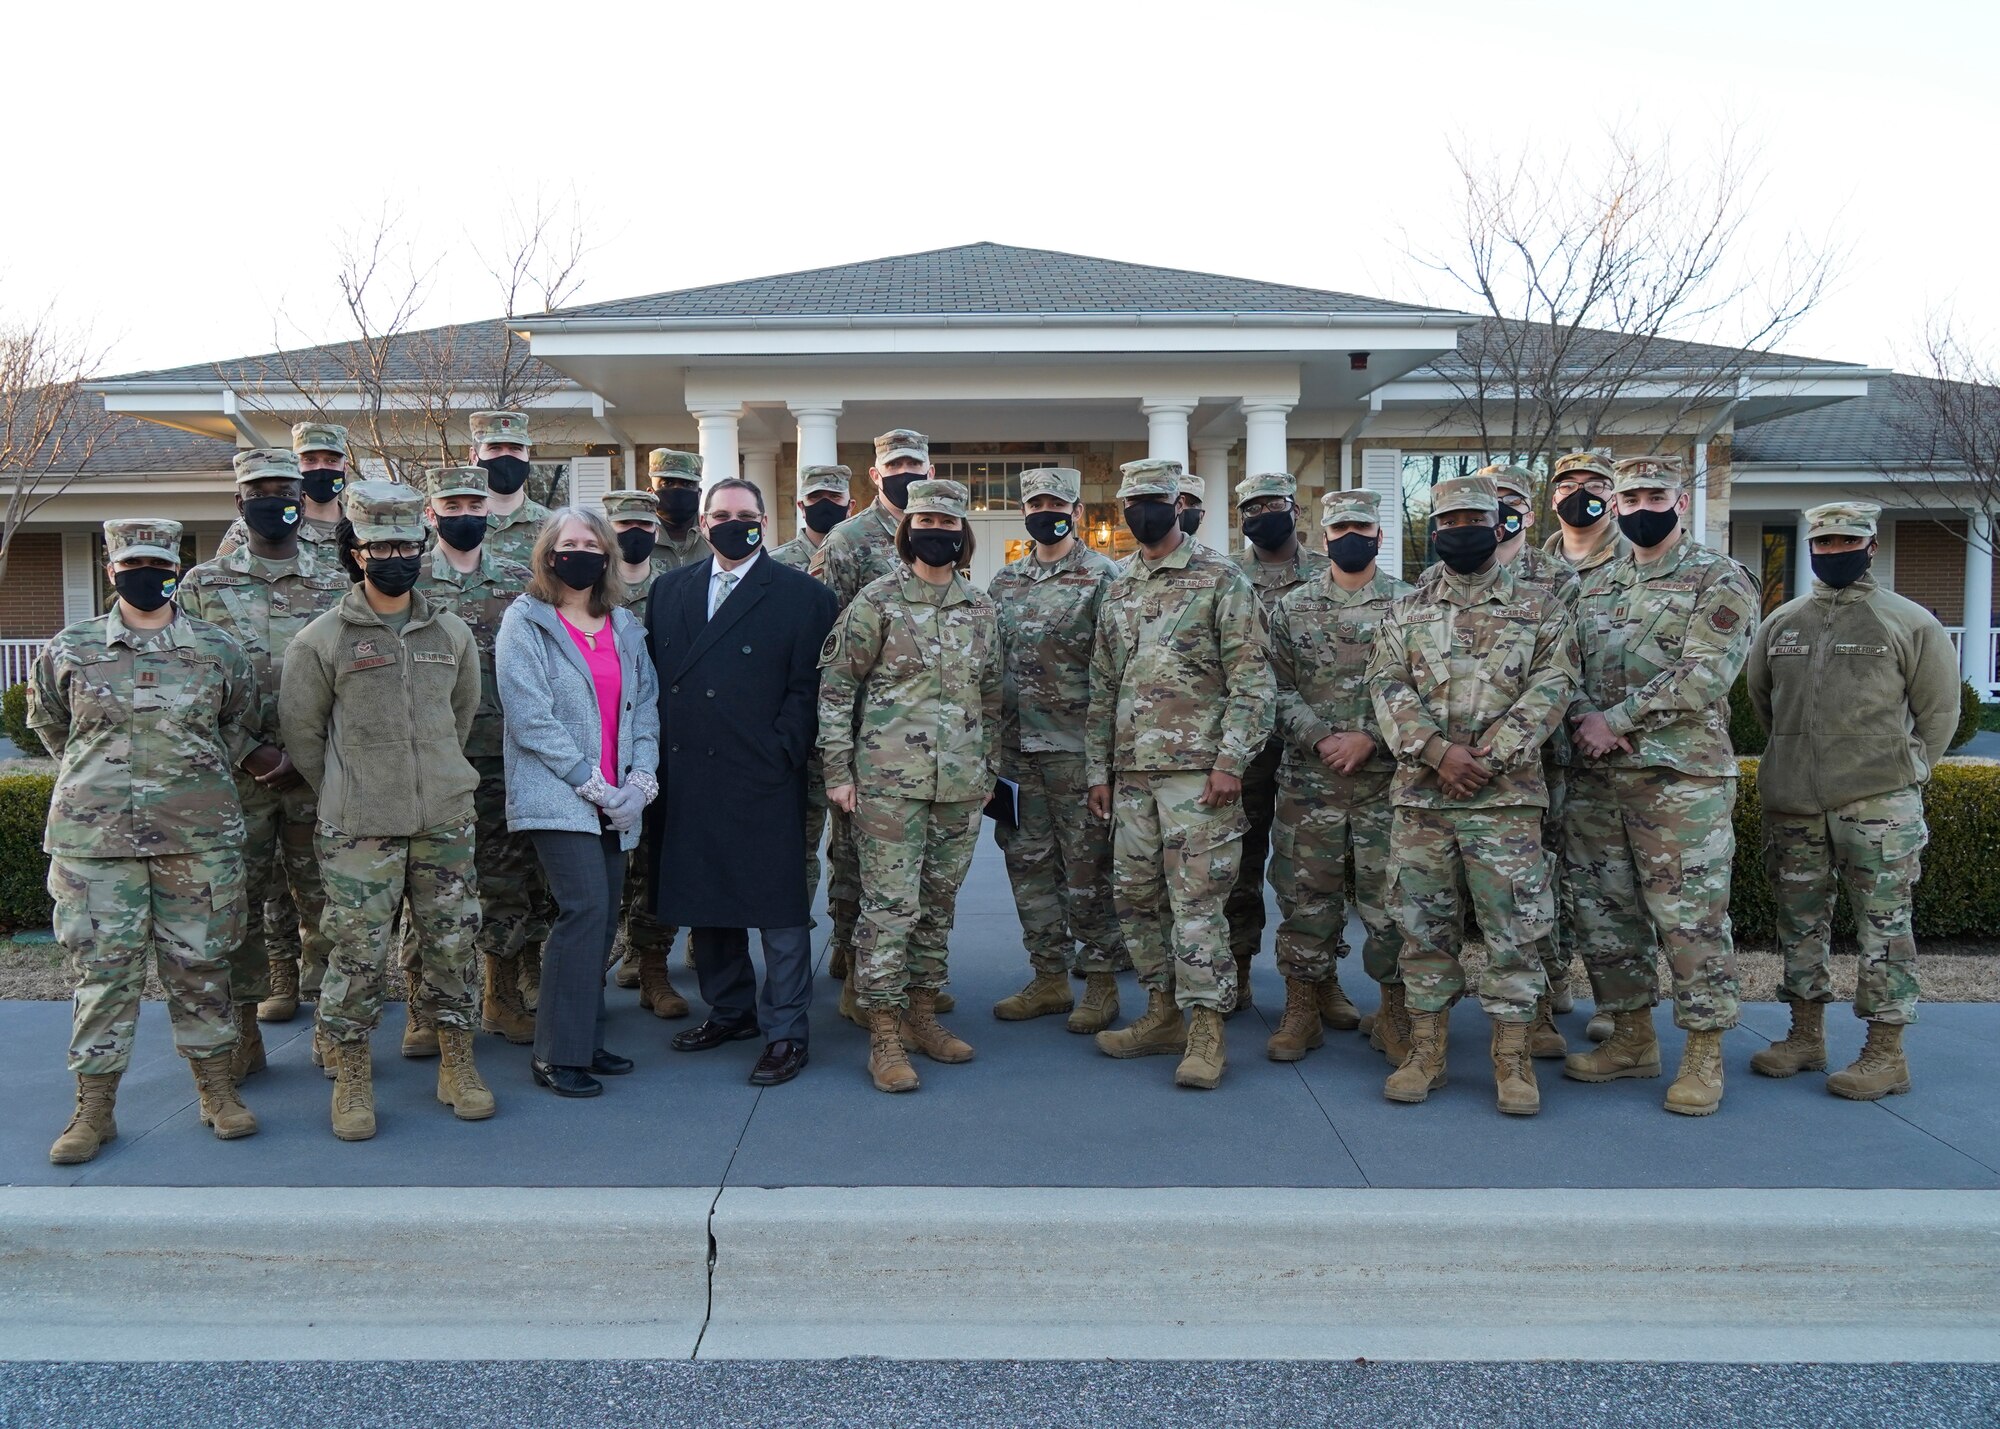 Chief Master Sgt. of the Air Force JoAnne Bass poses for a photo with a team from Air Force Mortuary Affairs Operations at Dover Air Force Base, Delaware, Jan. 7, 2021. The office of the Chief Master Sergeant of the Air Force represents the highest enlisted level of leadership, provides direction for the enlisted corps and represents their interests to the American public and all levels of government. (U.S. Air Force photo by Senior Airman Alyssa Day)